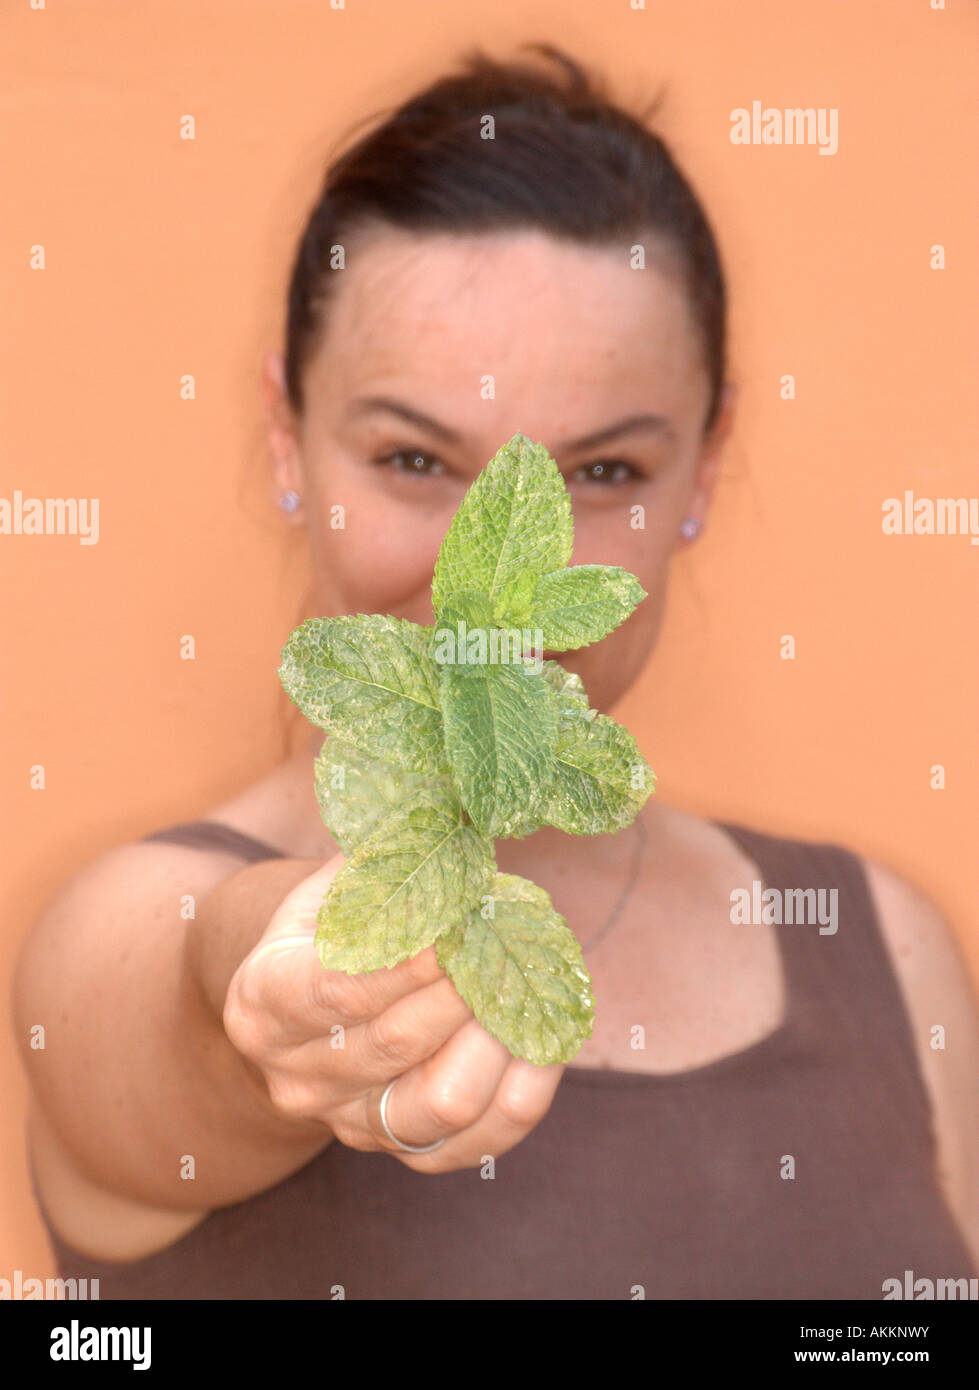 Woman showing a branch of Mint (Mentha) plant. Stock Photo